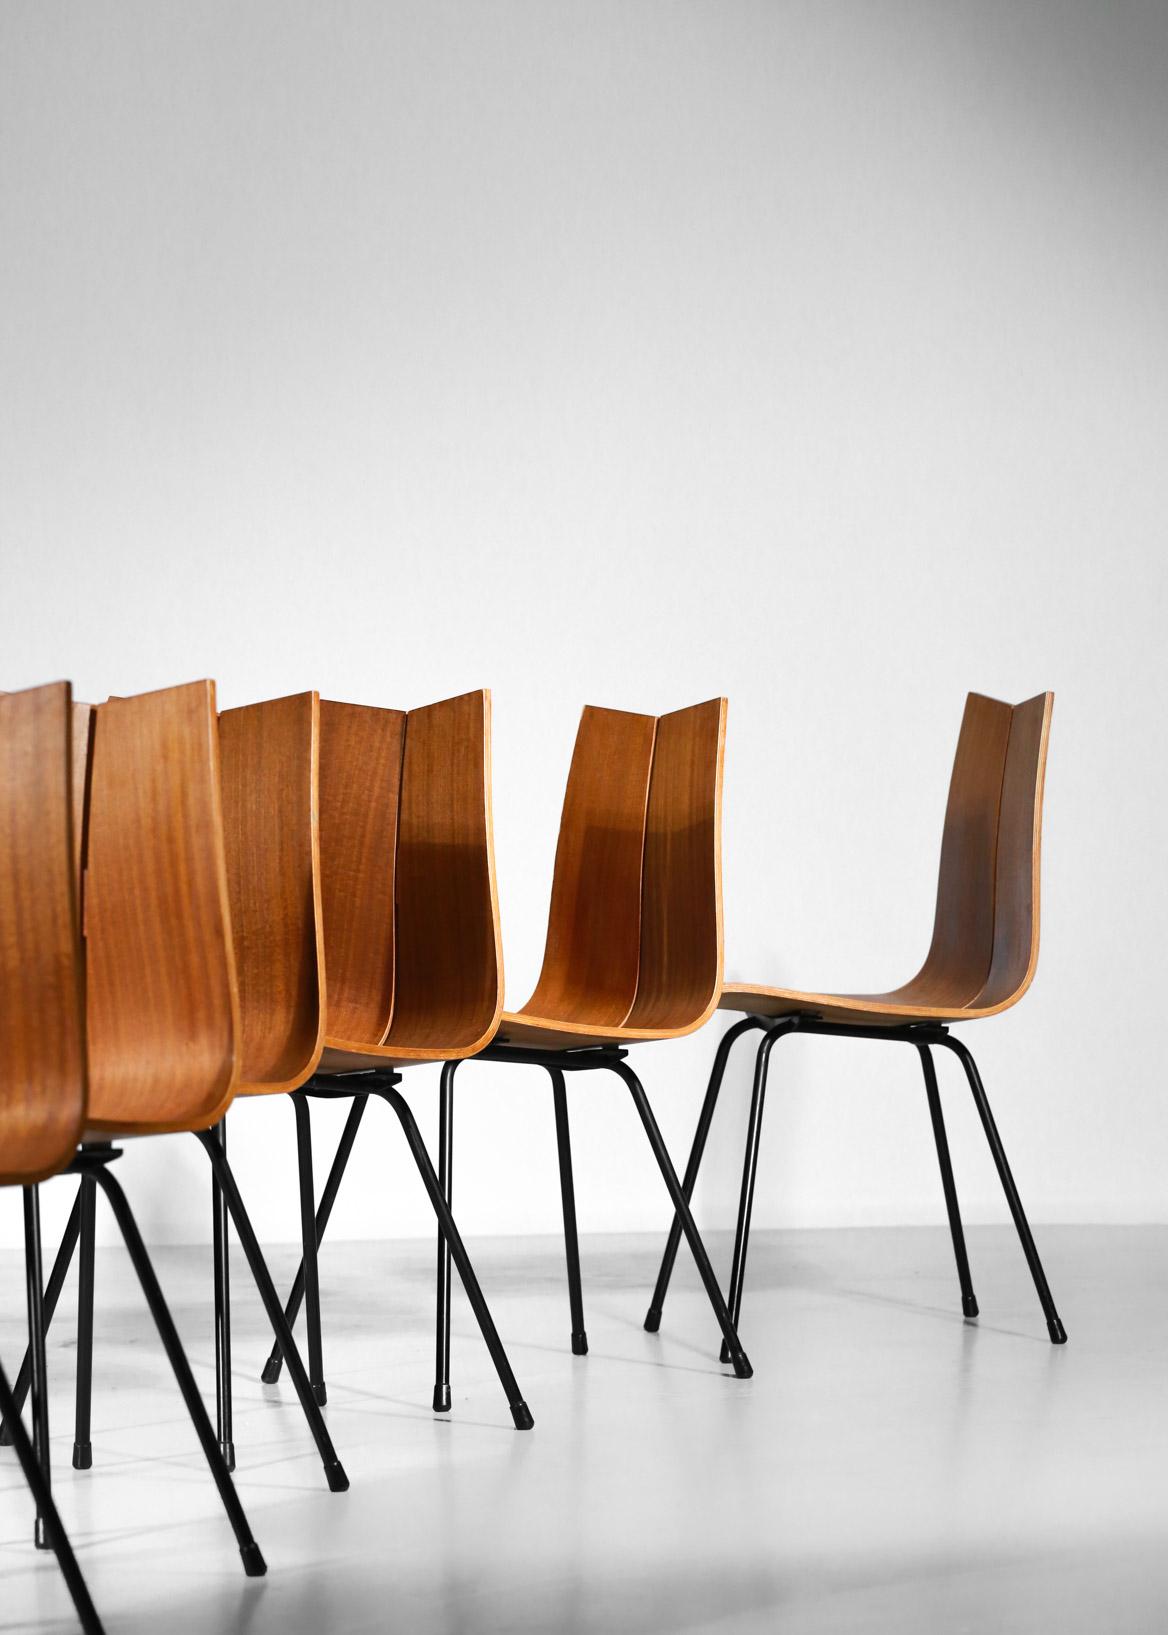 Steel Set of Six GA Chairs from the 1950s by Swiss Designer Hans Bellmann